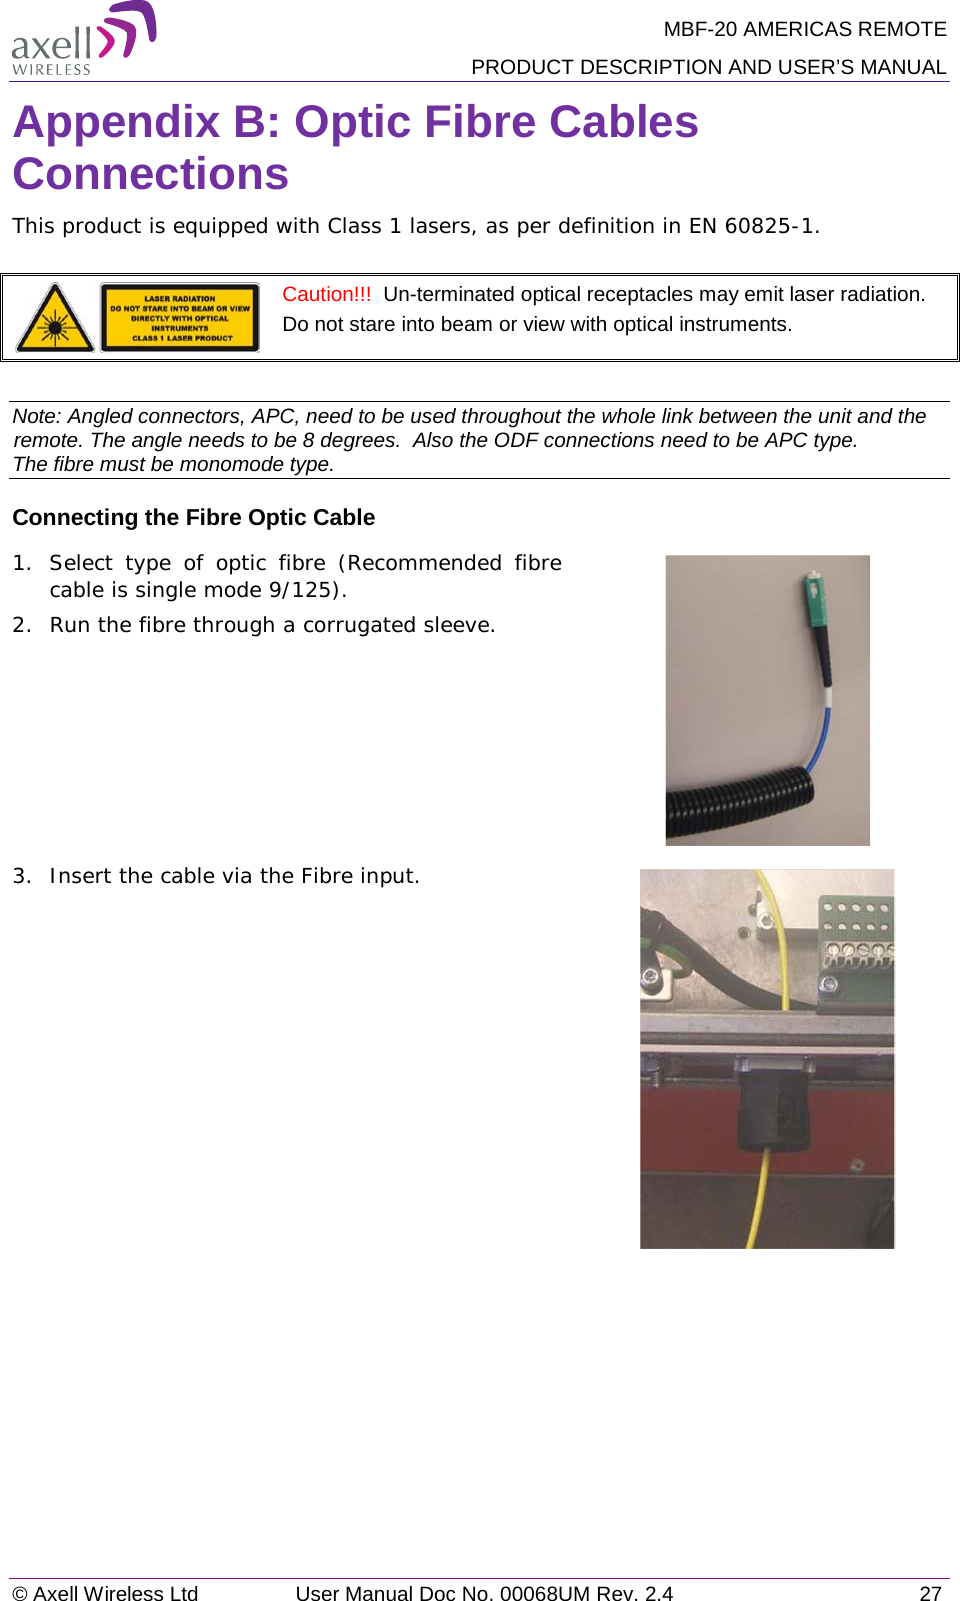 MBF-20 AMERICAS REMOTE PRODUCT DESCRIPTION AND USER’S MANUAL © Axell Wireless Ltd User Manual Doc No. 00068UM Rev. 2.4 27  Appendix B: Optic Fibre Cables Connections This product is equipped with Class 1 lasers, as per definition in EN 60825-1.    Caution!!!  Un-terminated optical receptacles may emit laser radiation.  Do not stare into beam or view with optical instruments.  Note: Angled connectors, APC, need to be used throughout the whole link between the unit and the remote. The angle needs to be 8 degrees.  Also the ODF connections need to be APC type.  The fibre must be monomode type.  Connecting the Fibre Optic Cable 1.  Select type of optic fibre (Recommended fibre cable is single mode 9/125). 2.  Run the fibre through a corrugated sleeve.  3.  Insert the cable via the Fibre input.   